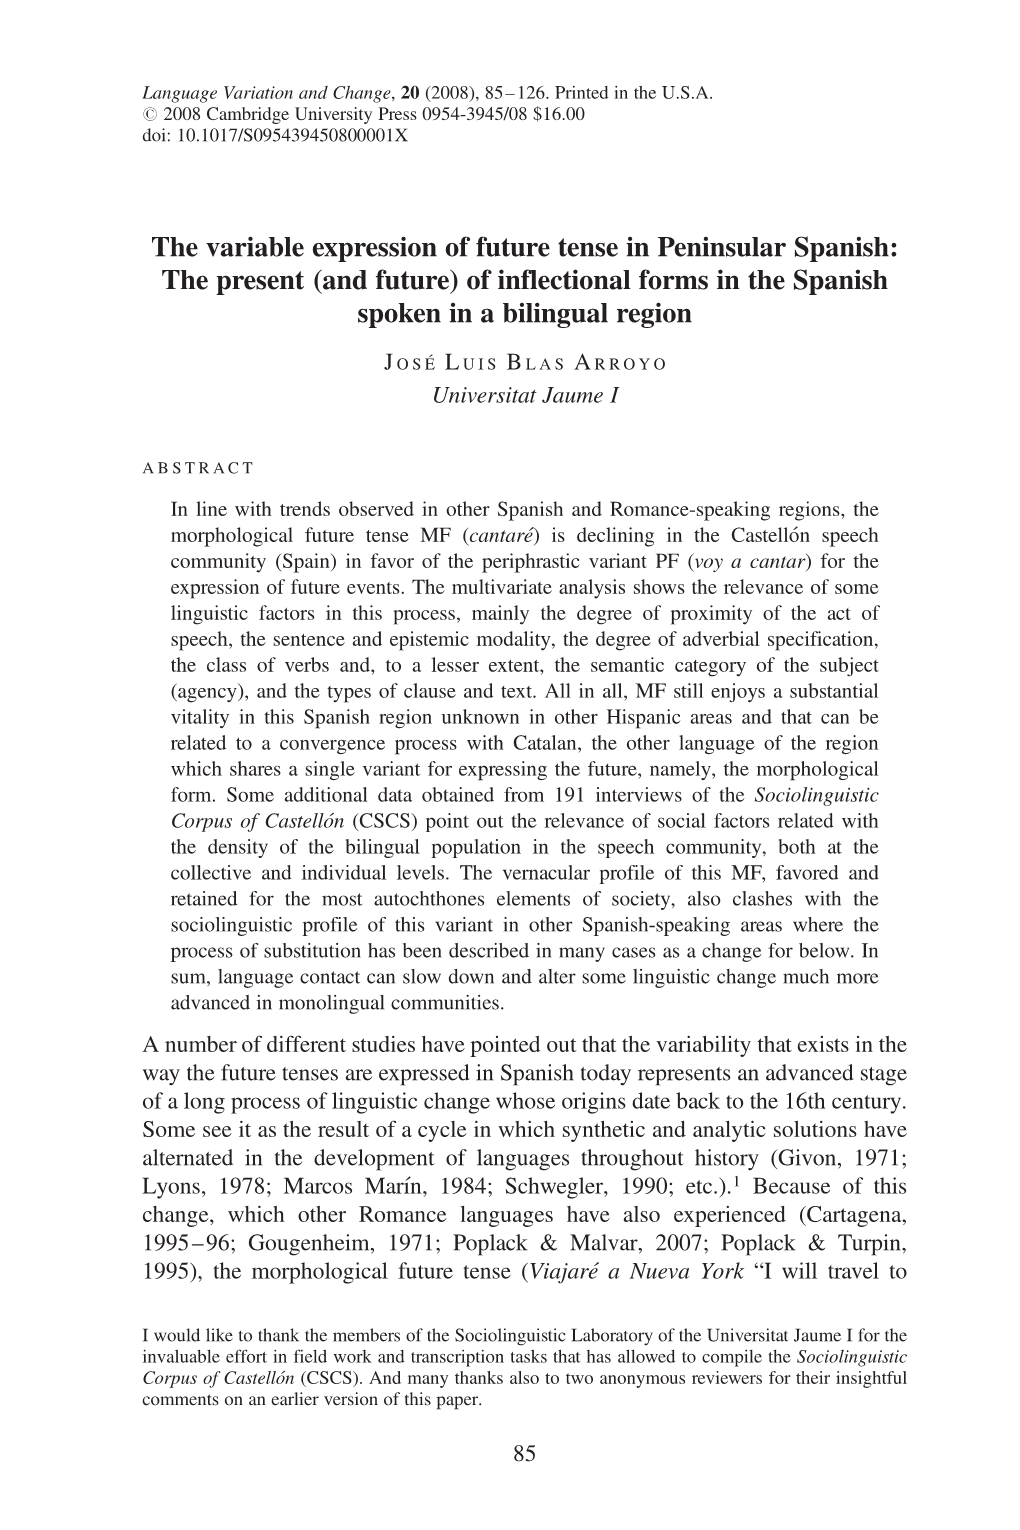 The Variable Expression of Future Tense in Peninsular Spanish: the Present (And Future) of Inflectional Forms in the Spanish Spoken in a Bilingual Region